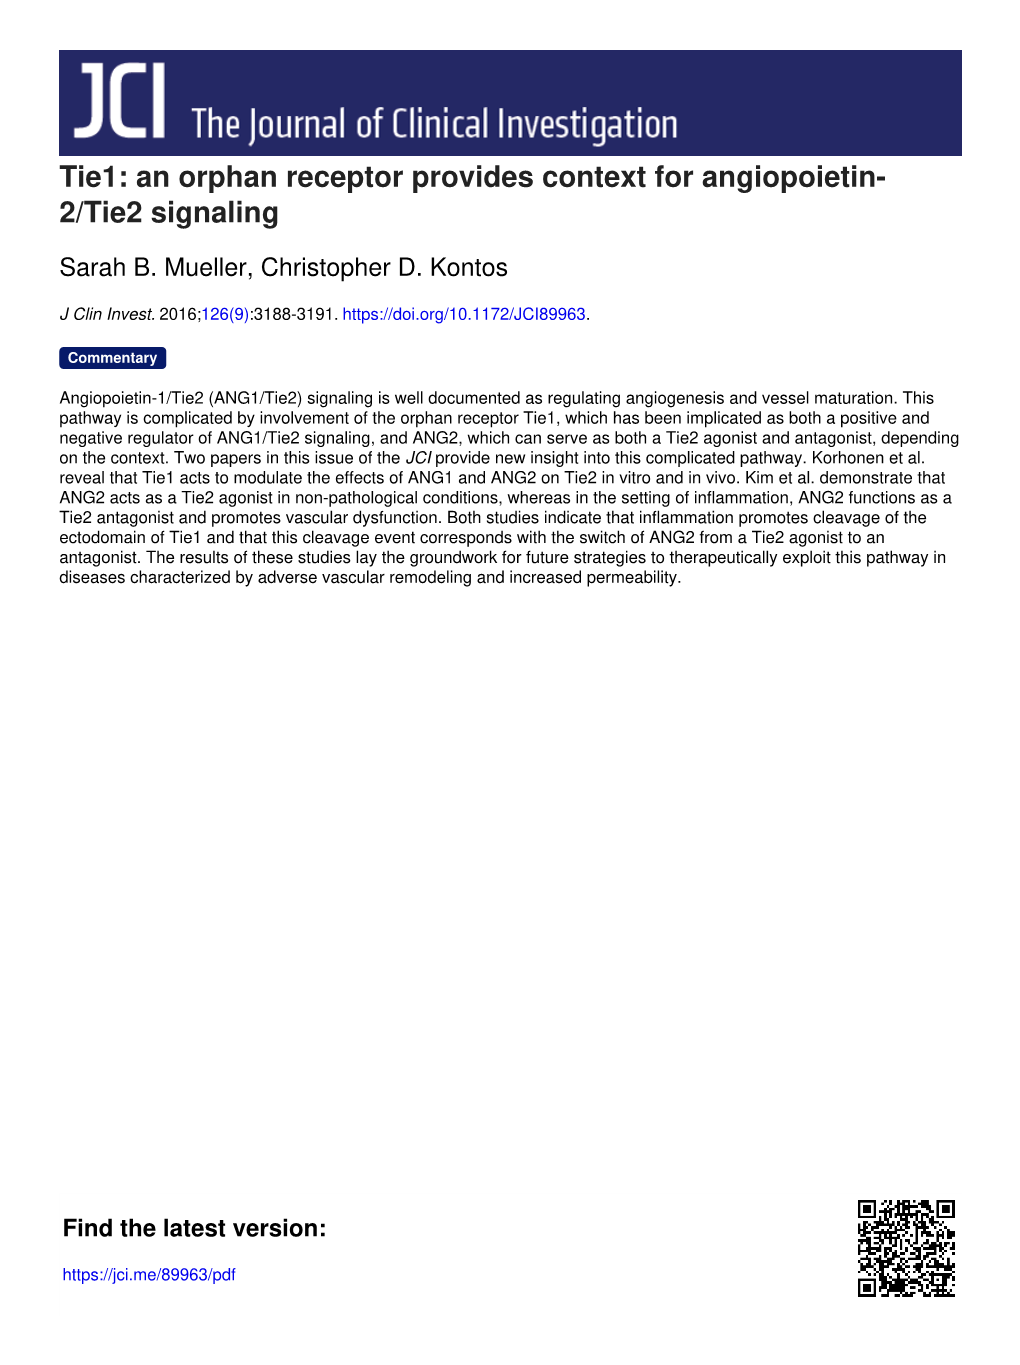 An Orphan Receptor Provides Context for Angiopoietin- 2/Tie2 Signaling